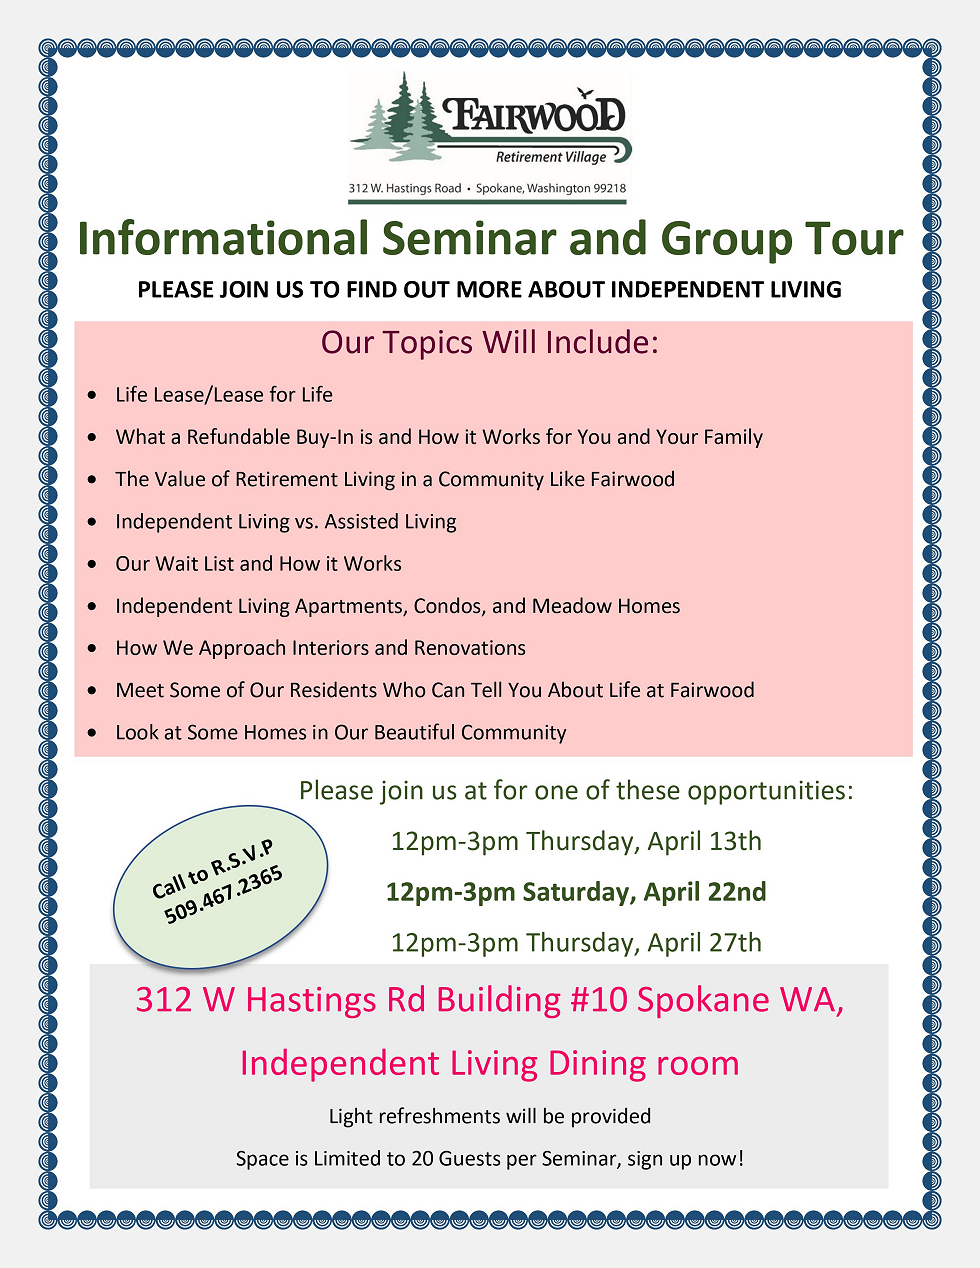 Information Seminars and Group Tours Advertisement